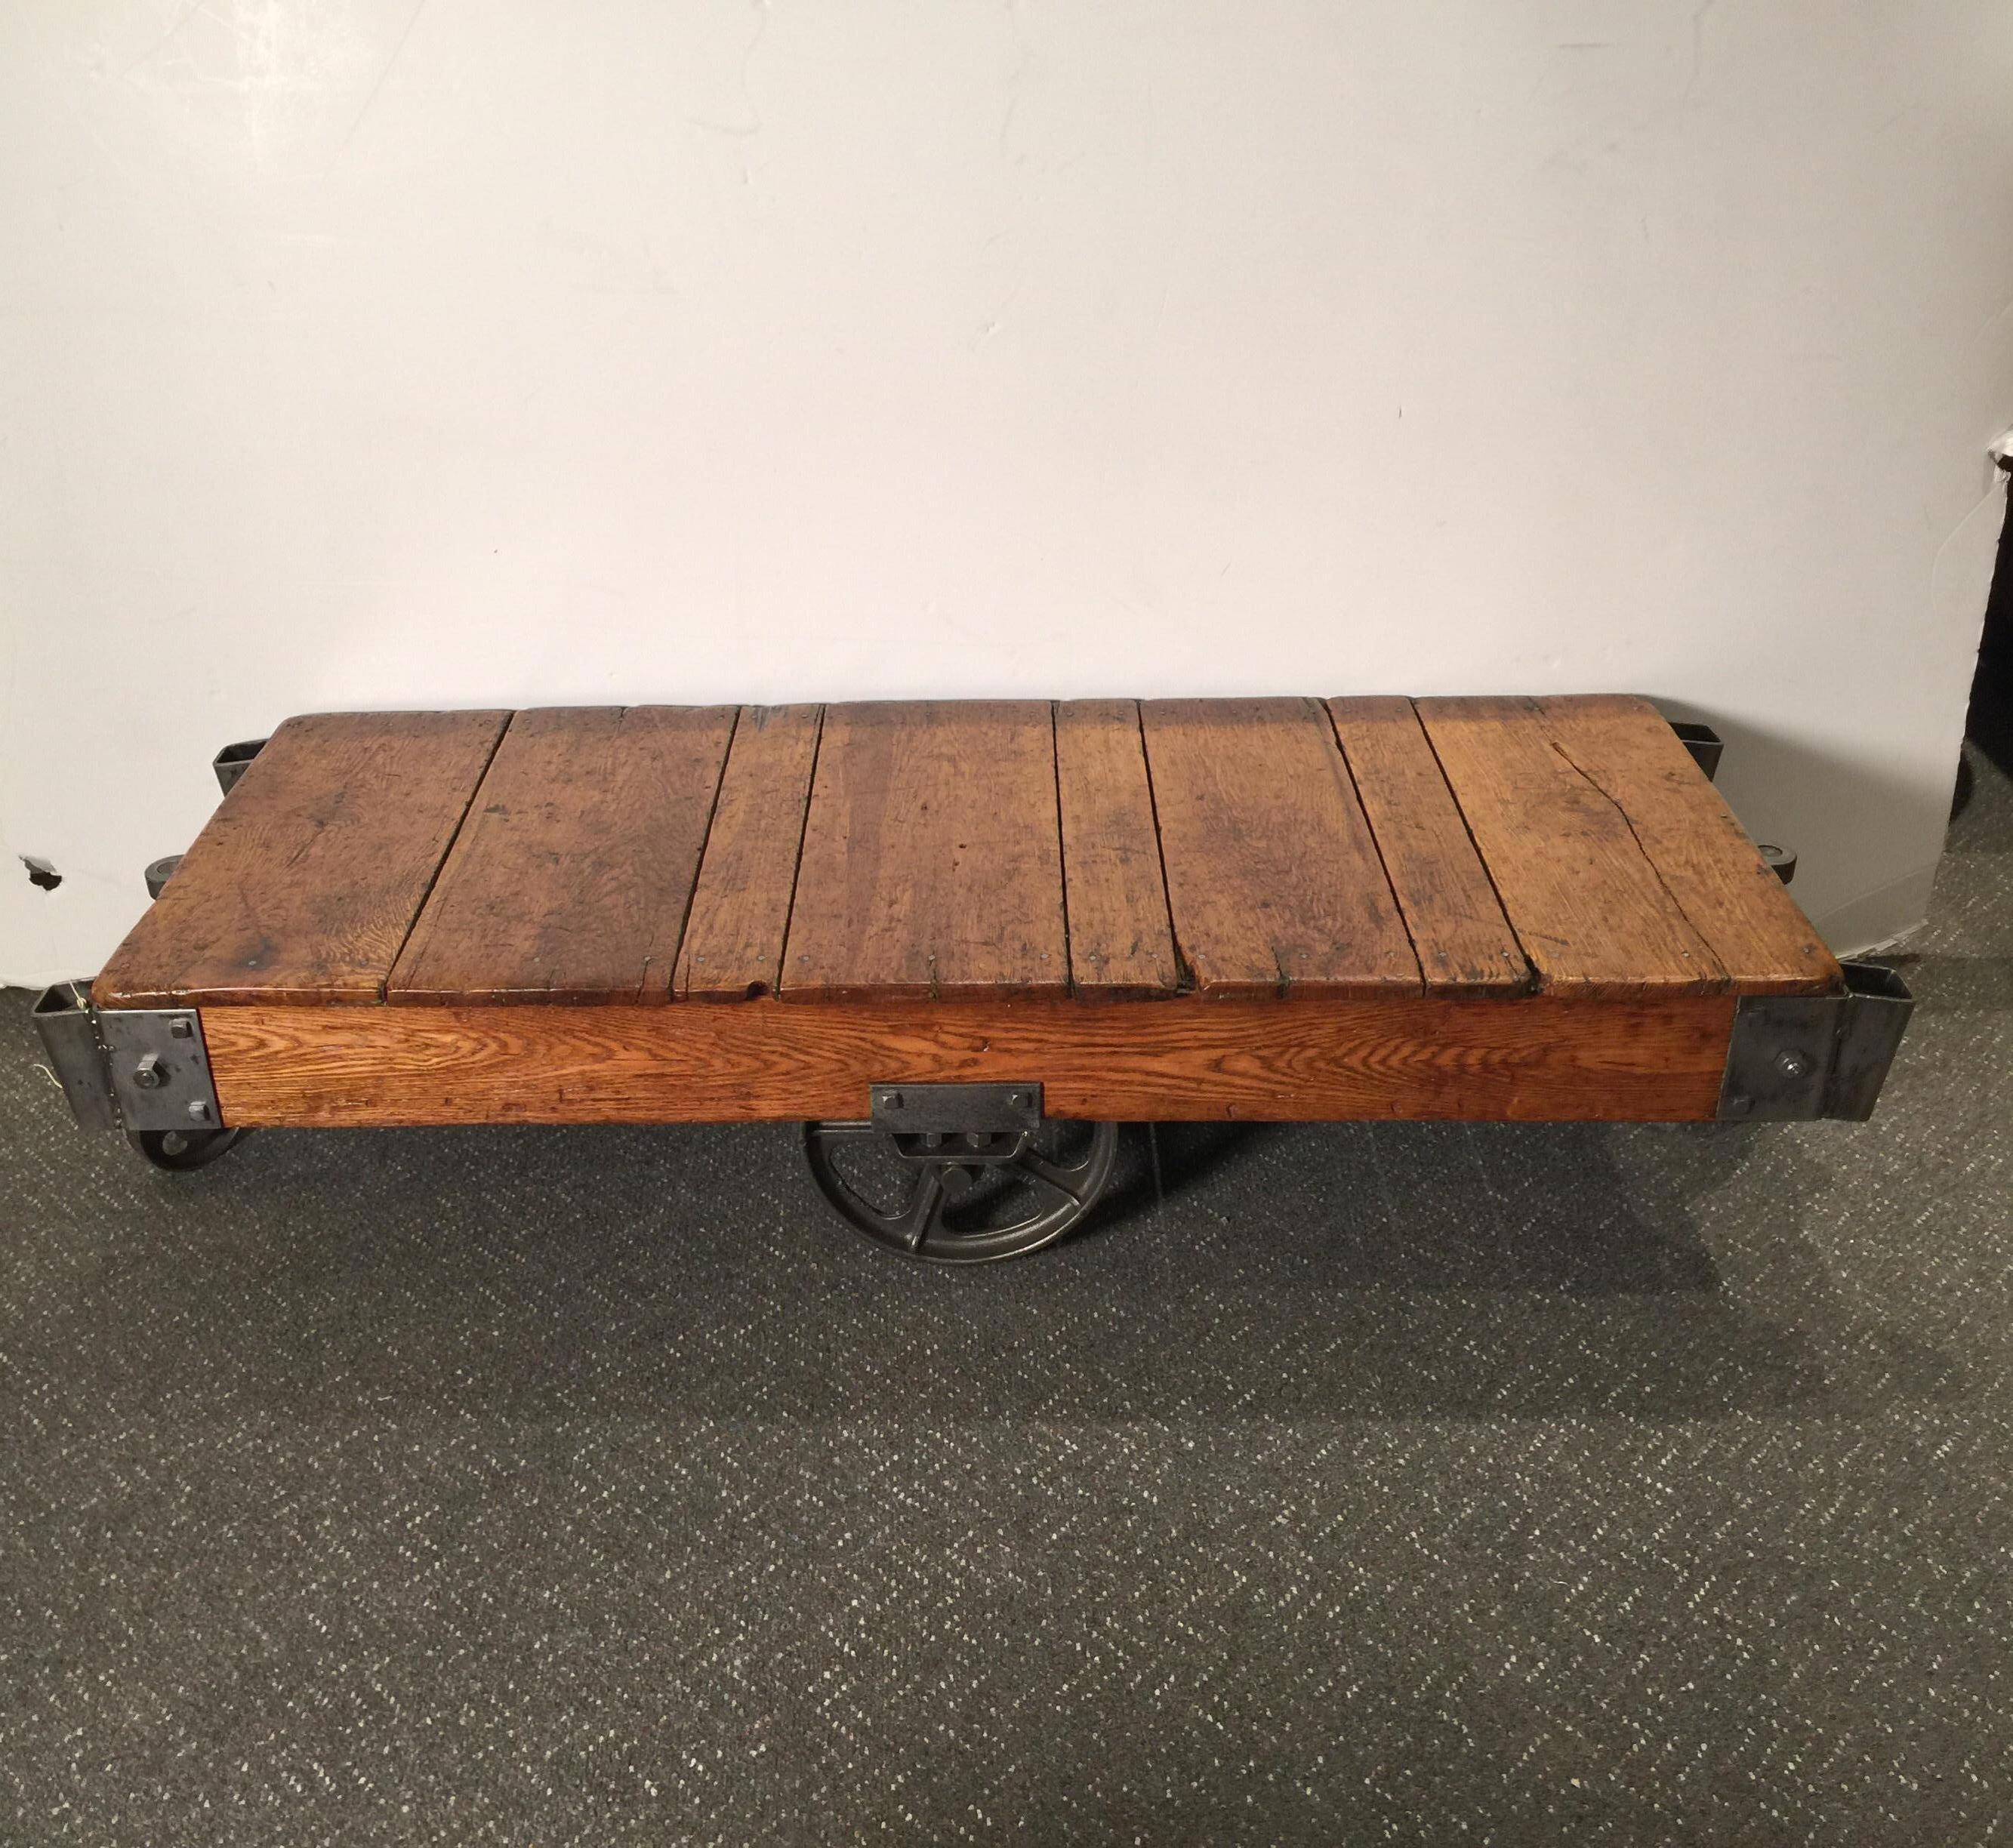 A steel and oak 1930s factory cart that has been fully restored. The steel has been cleaned and polished while still leaving age and patination. The oak had been detailed and much of the original character of the wood preserved with a warm aged